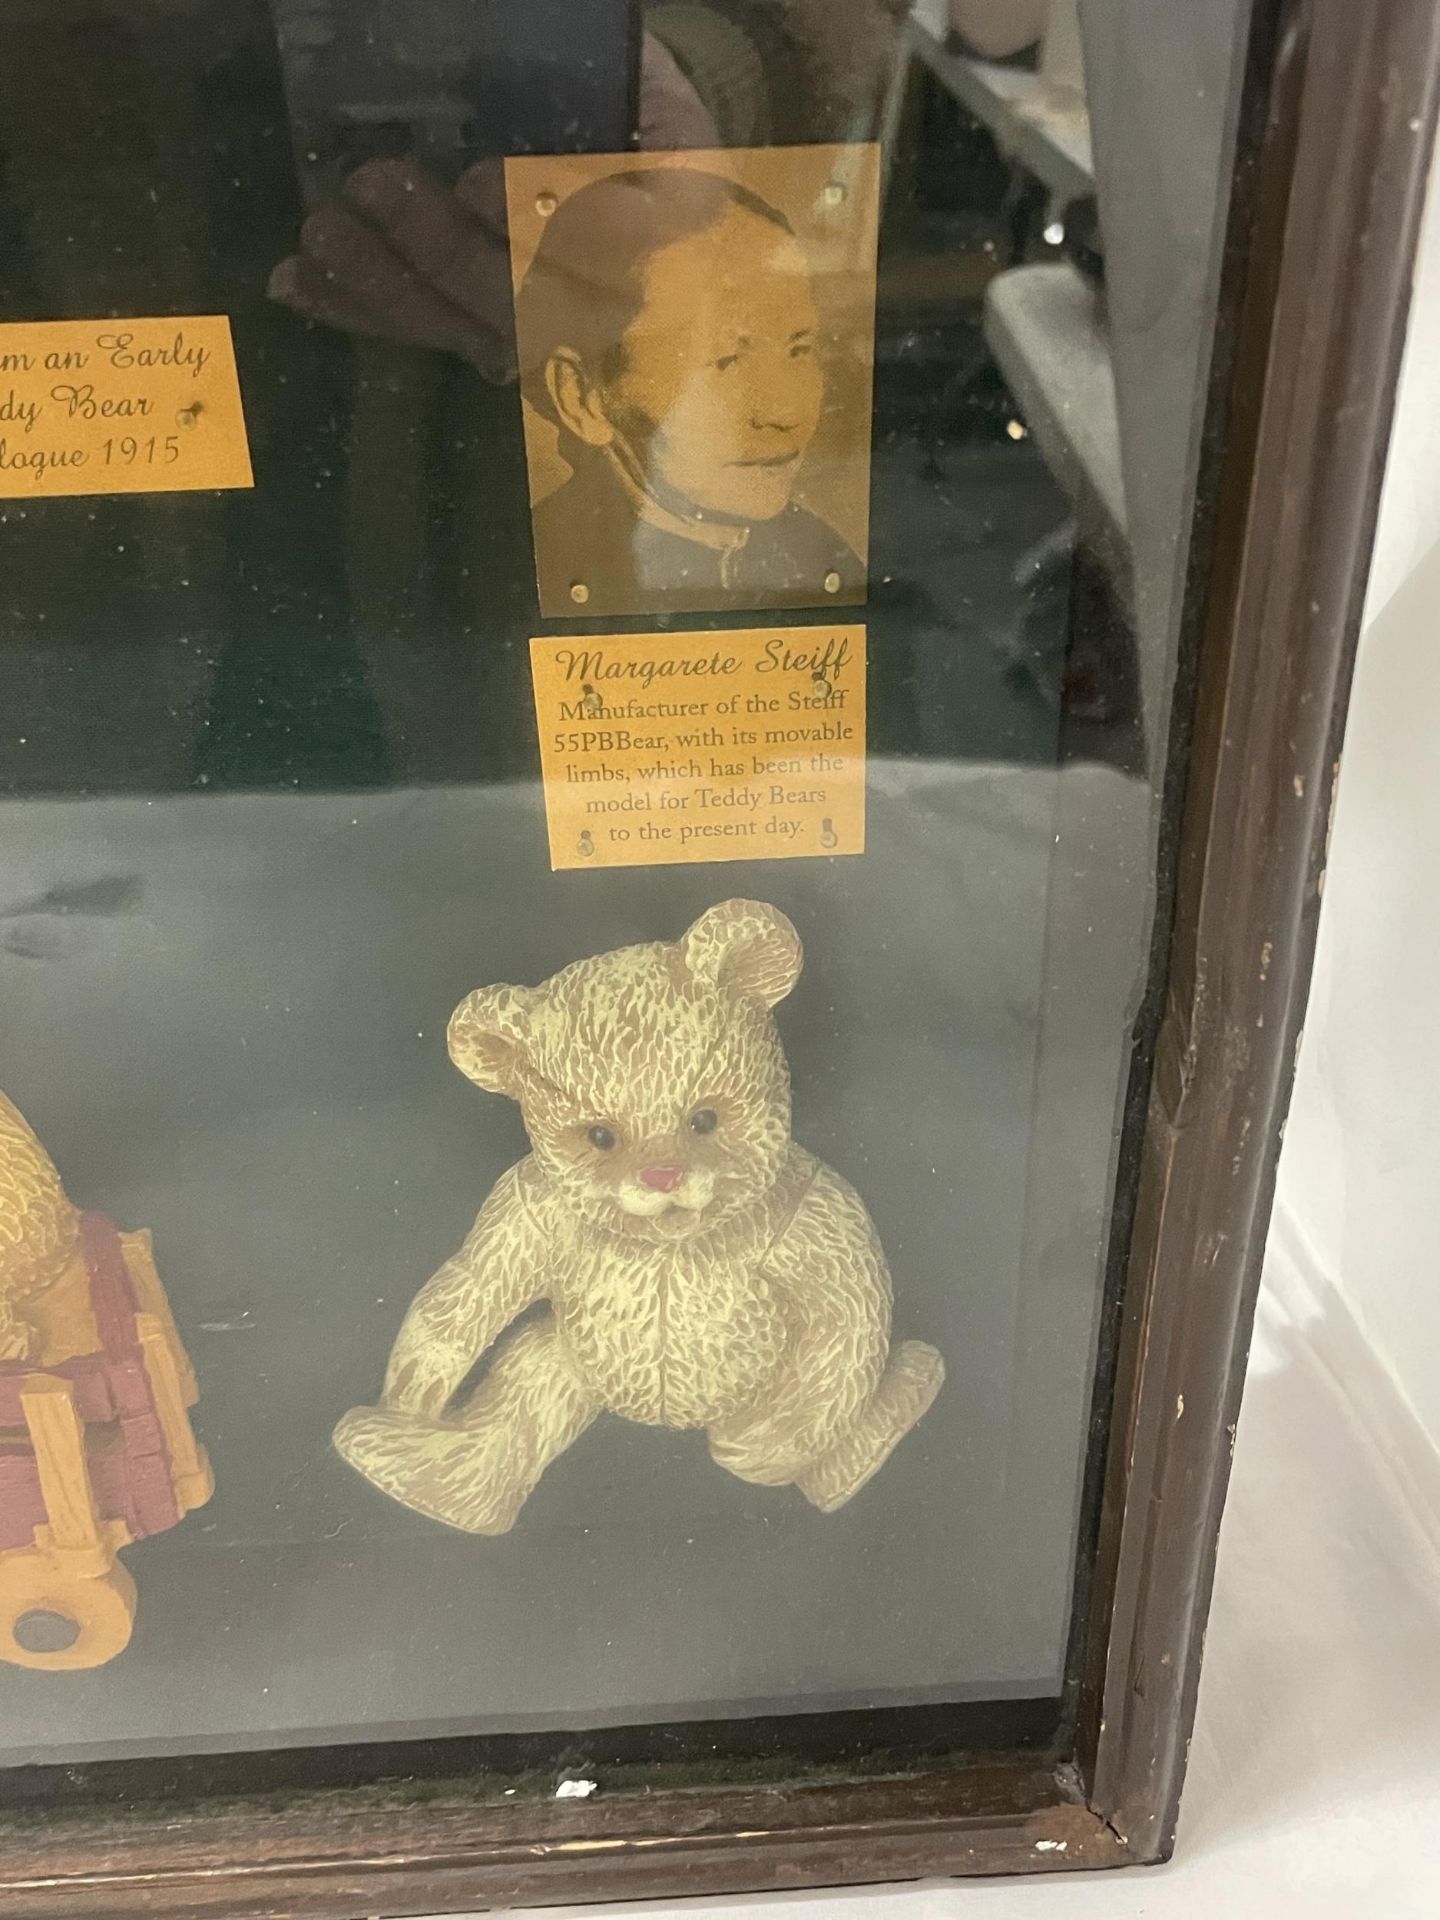 A GLASS FRONTED WOODEN CASED DISPLAY BOX WITH TEDDIES AND THEIR STORIES - A HISTORY OF THE STEIFF - Image 4 of 4